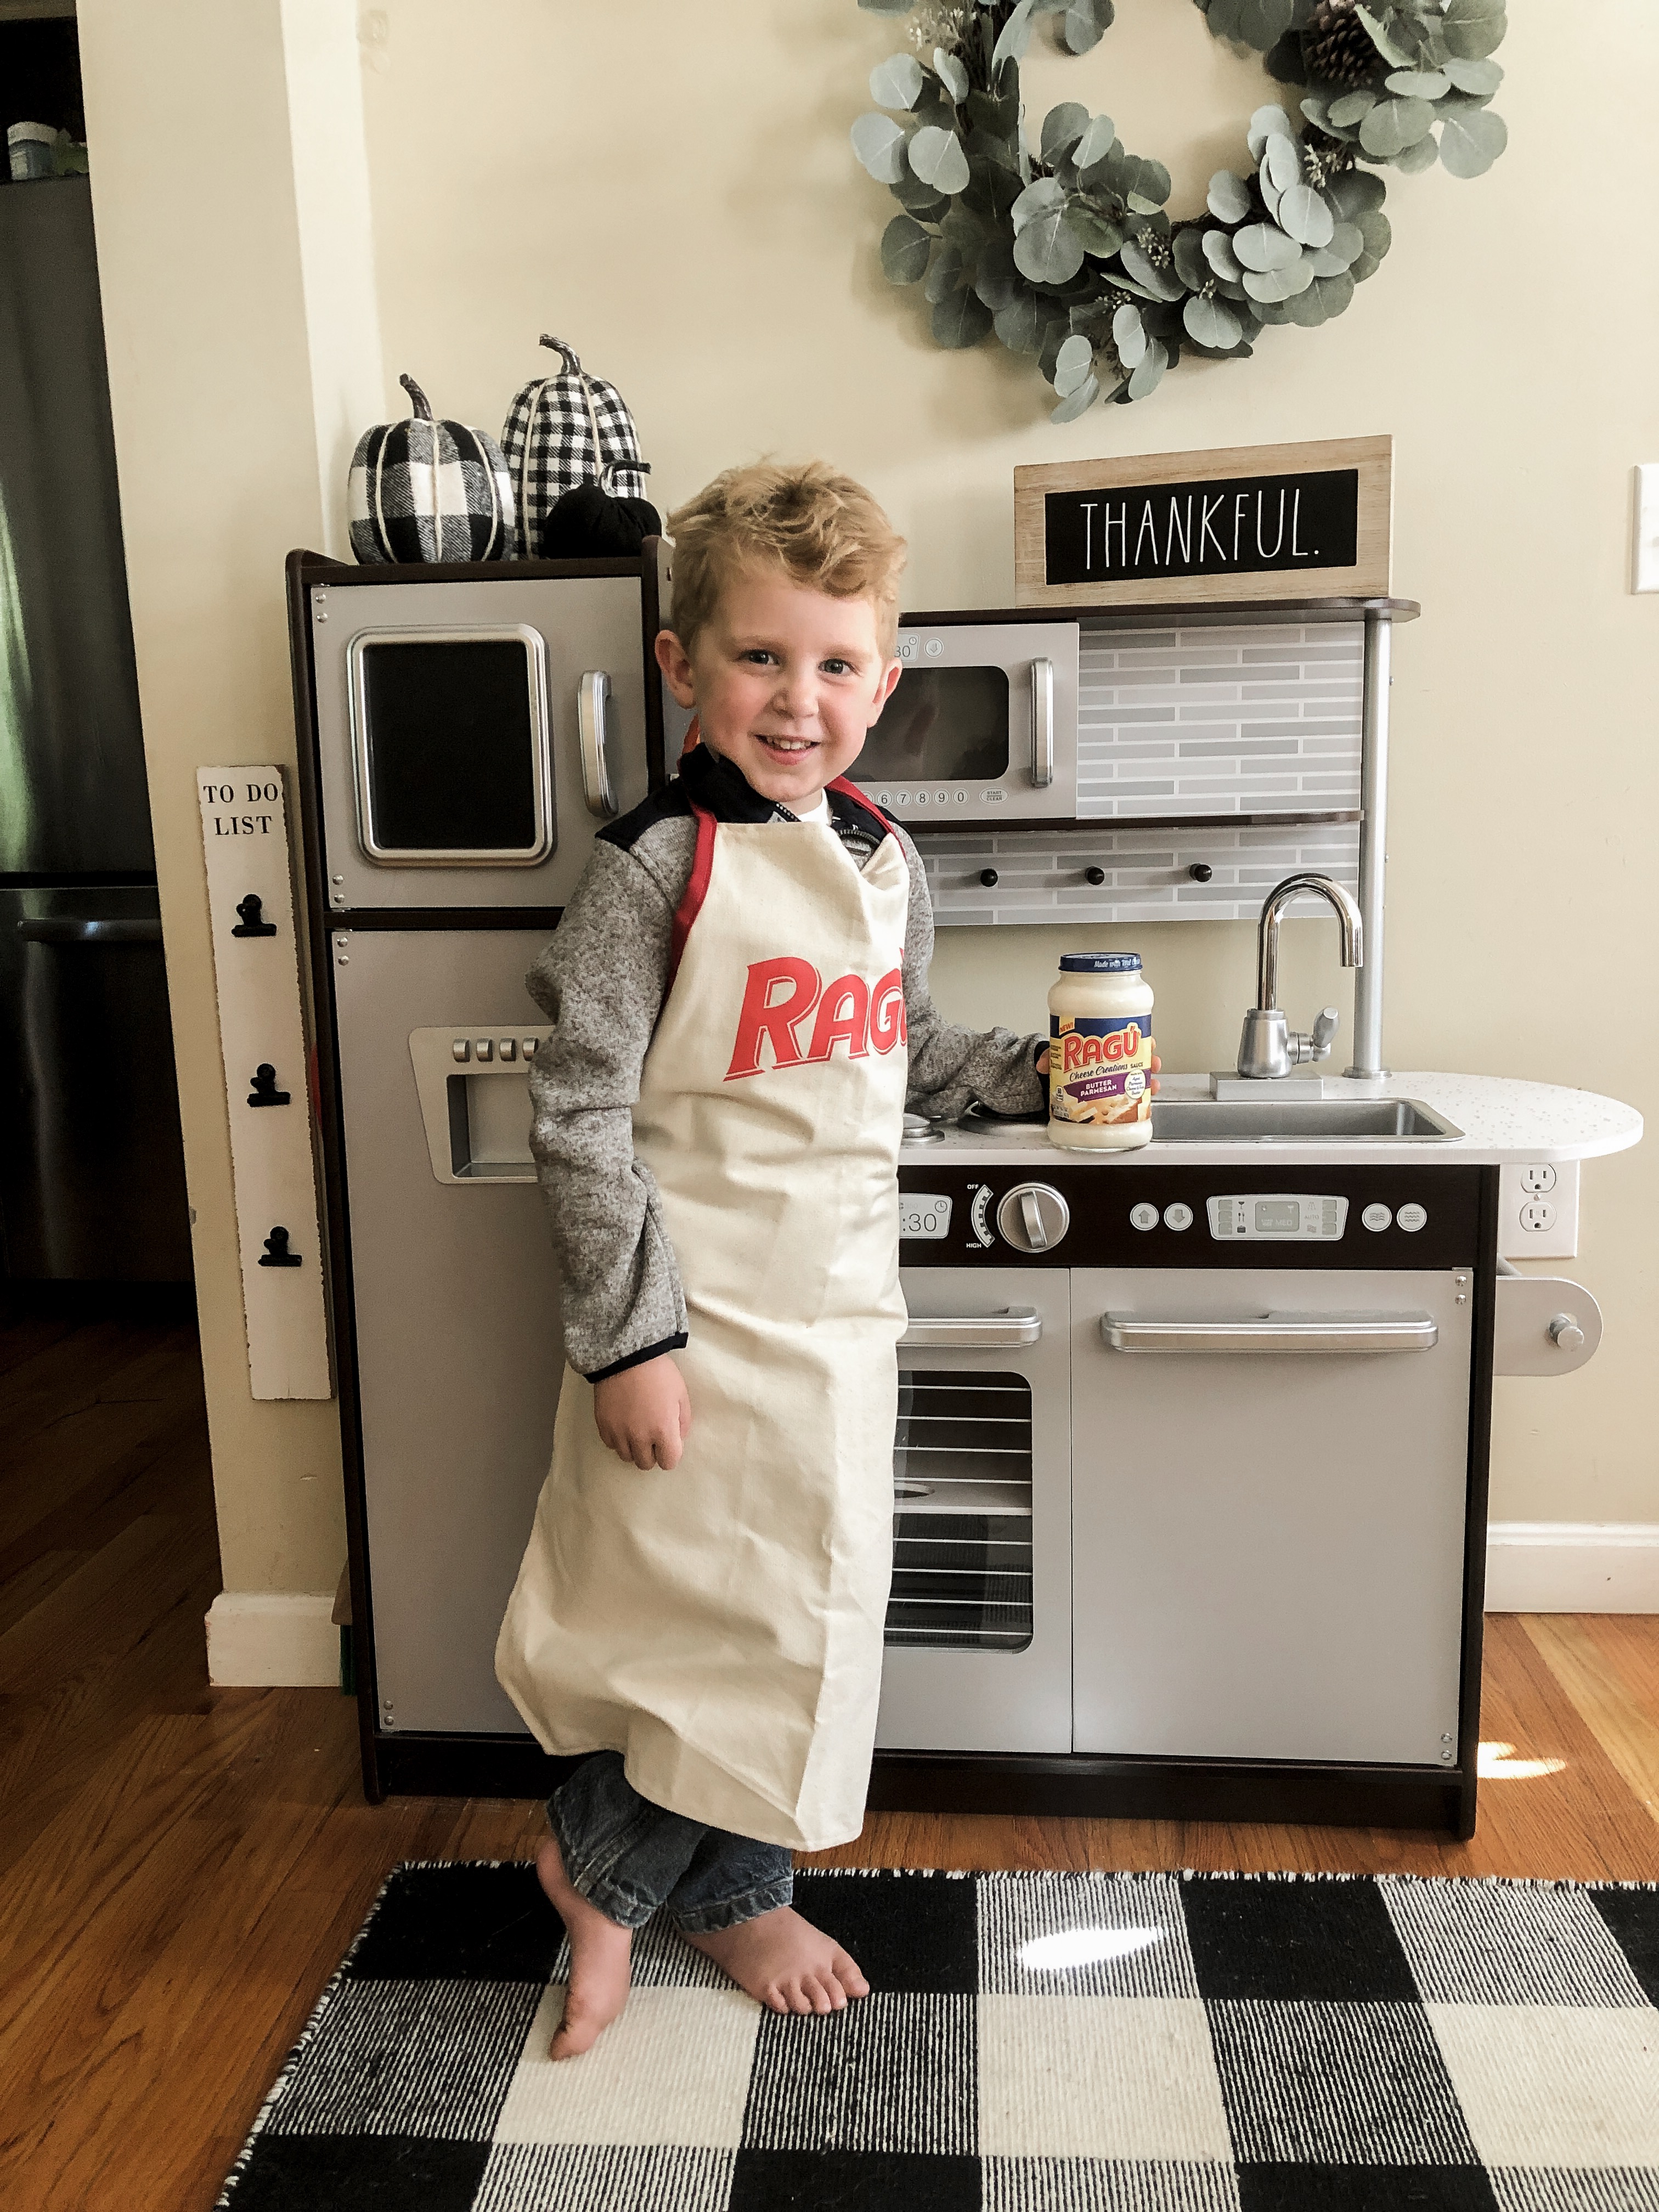 Kid-Friendly Foods with BabbleBoxx, Garden Classic Meatless Meatballs, Nutiva Squeezable Organic Coconut Manna, North Coast Organic Probiotic Apple Sauce, Ragu Butter Parmesan Sauce, Tessemae's Ketchup, Tessemae's Organic Dairy Free Ranch